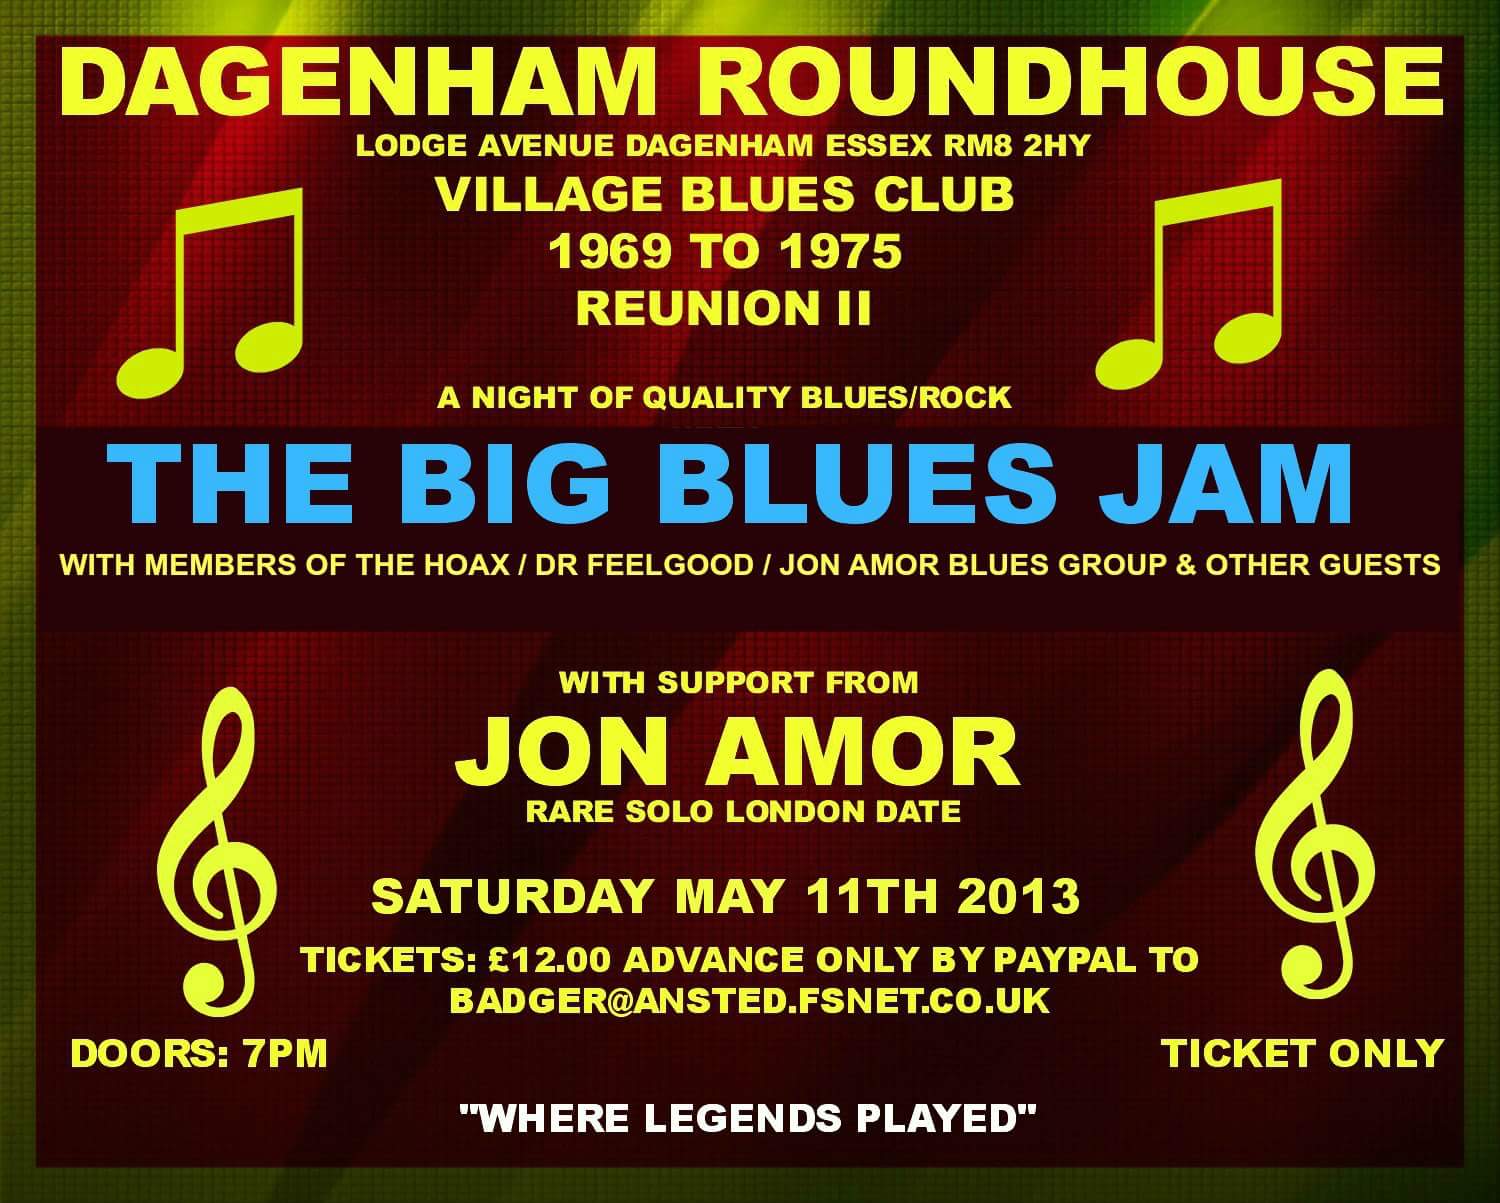 11 May 2013 at The Roundhouse, Dagenham